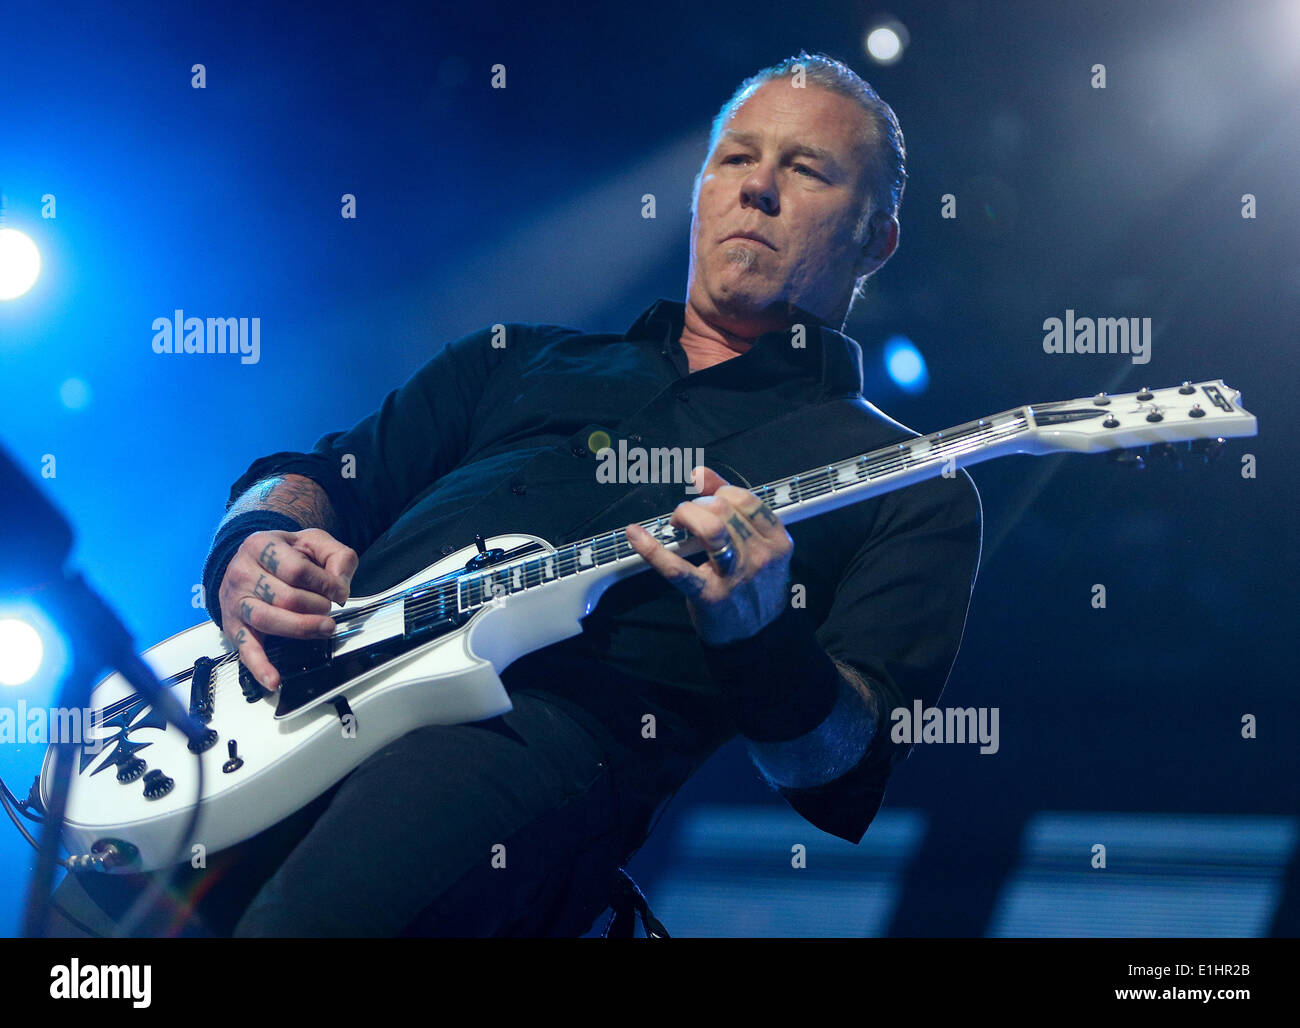 Hamburg, Germany. 04th June, 2014. James Hetfield performs with his band  Metallica at Imtech Arena in Hamburg, Germany, 04 June 2014. Metallica will  also perform at the festivals Rock am Ring (05-08